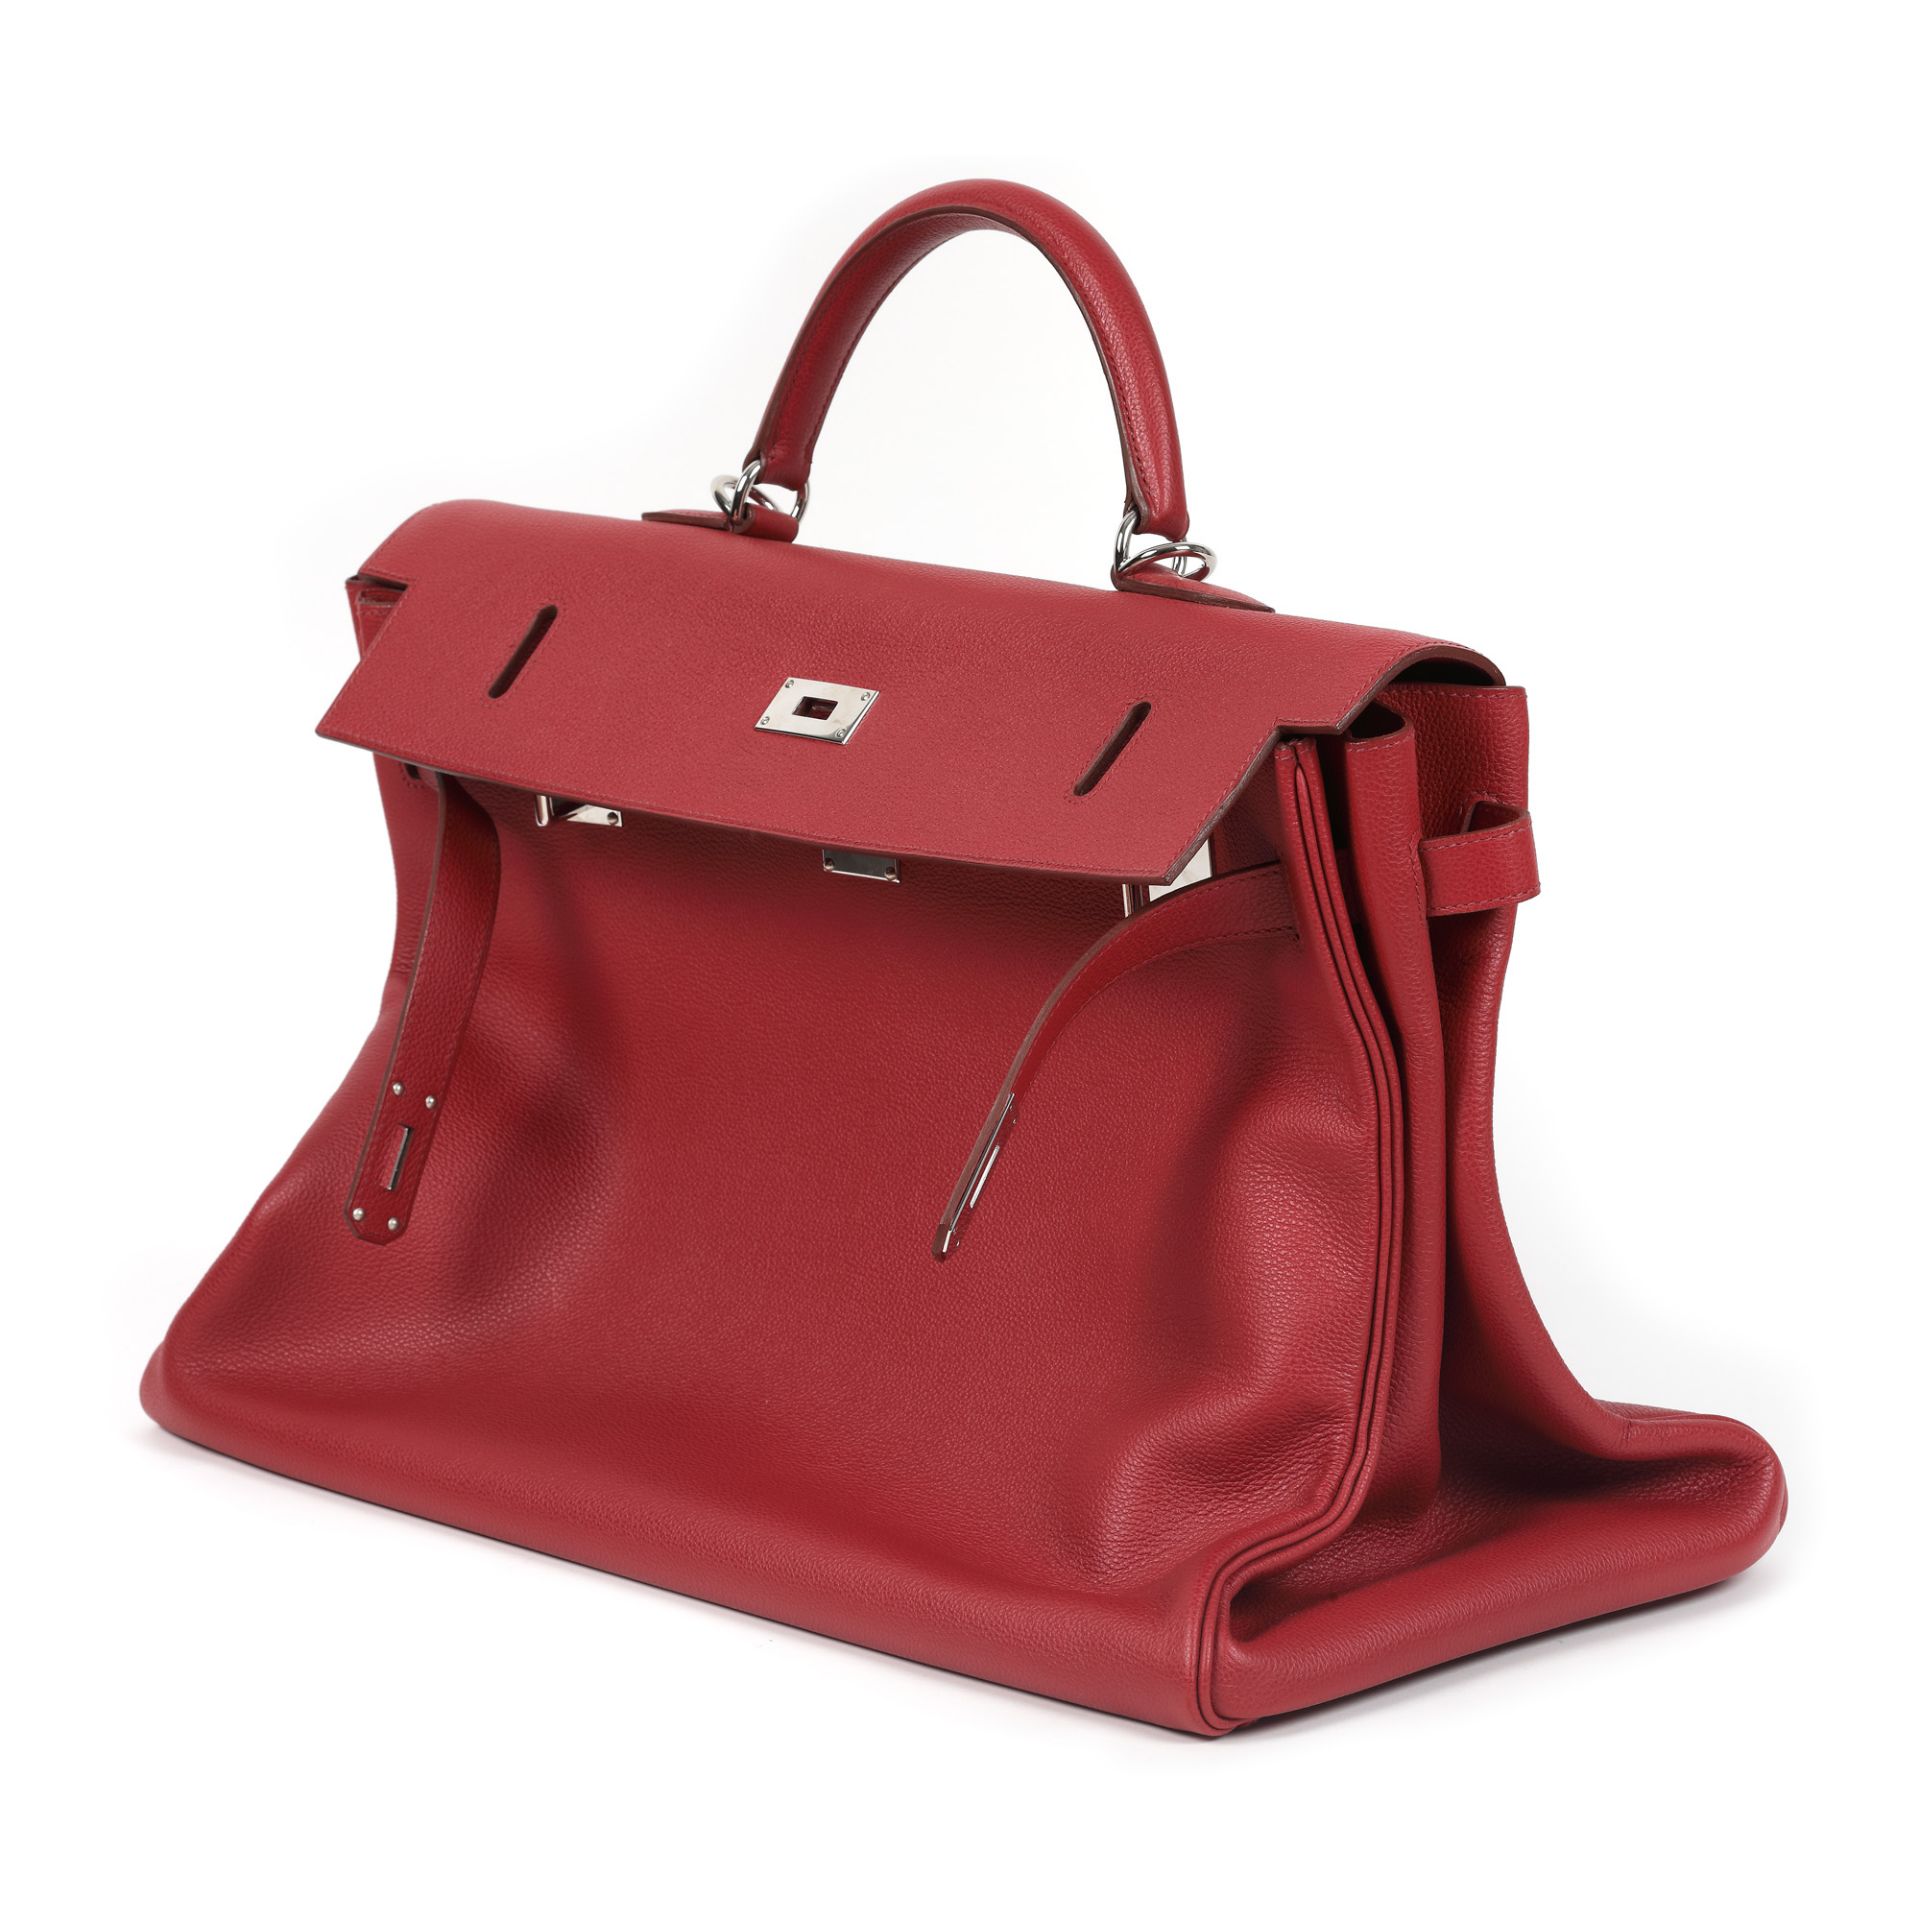 "Kelly Voyage" - Hermès travel bag, Clemence leather, Rouge Garance colour, limited edition - Image 3 of 4